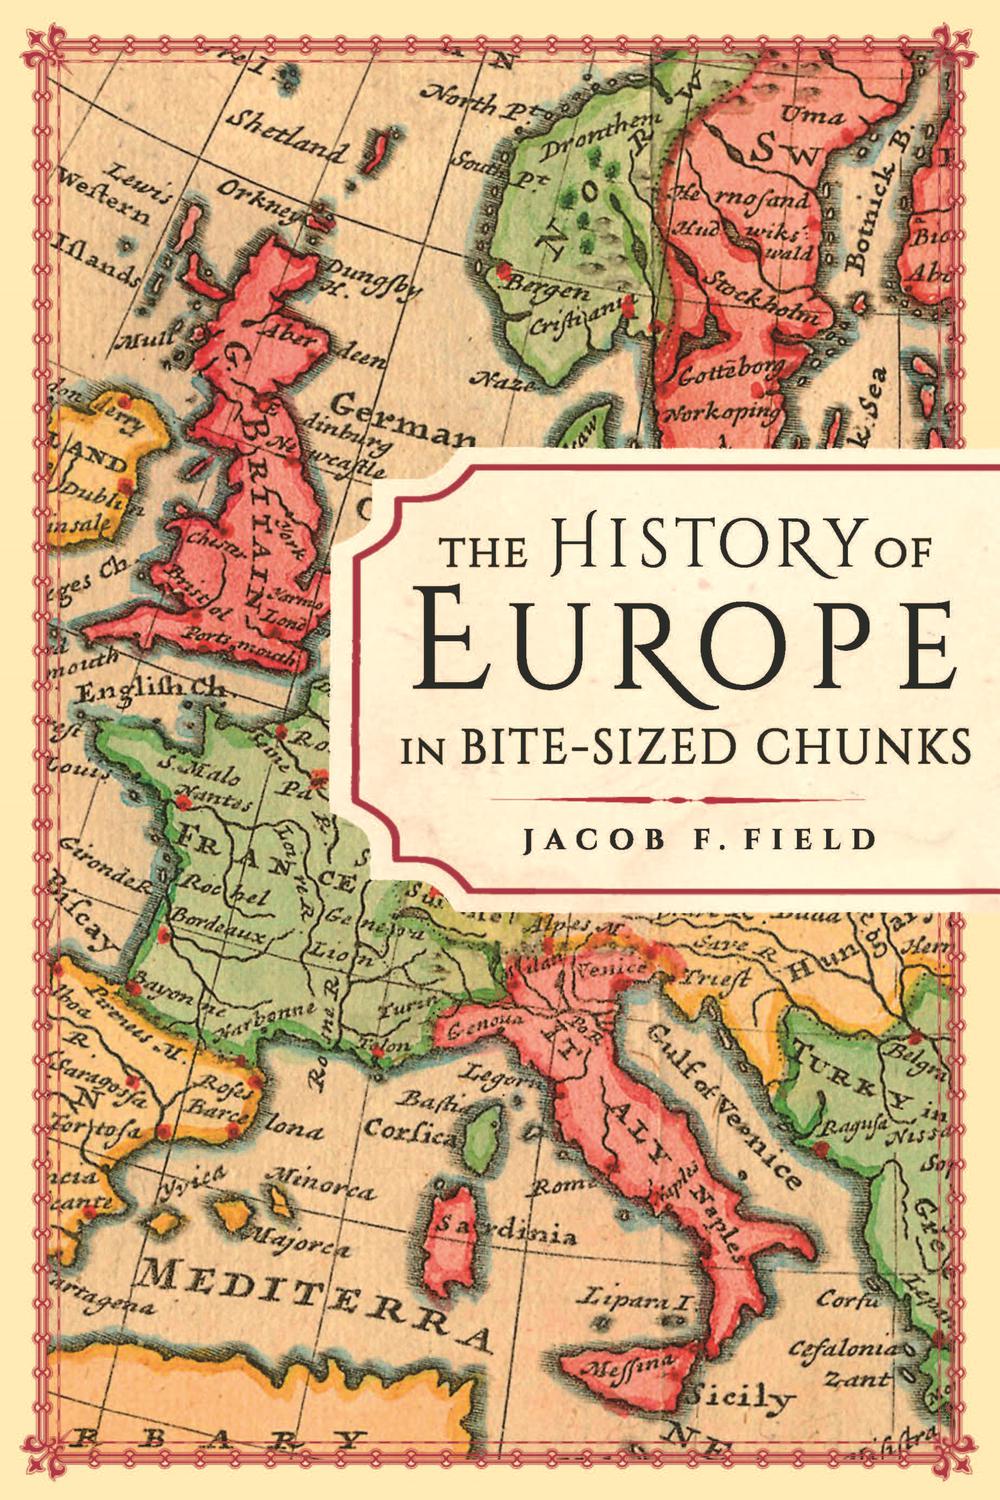 The History of Europe in Bite-sized Chunks - Jacob F. Field